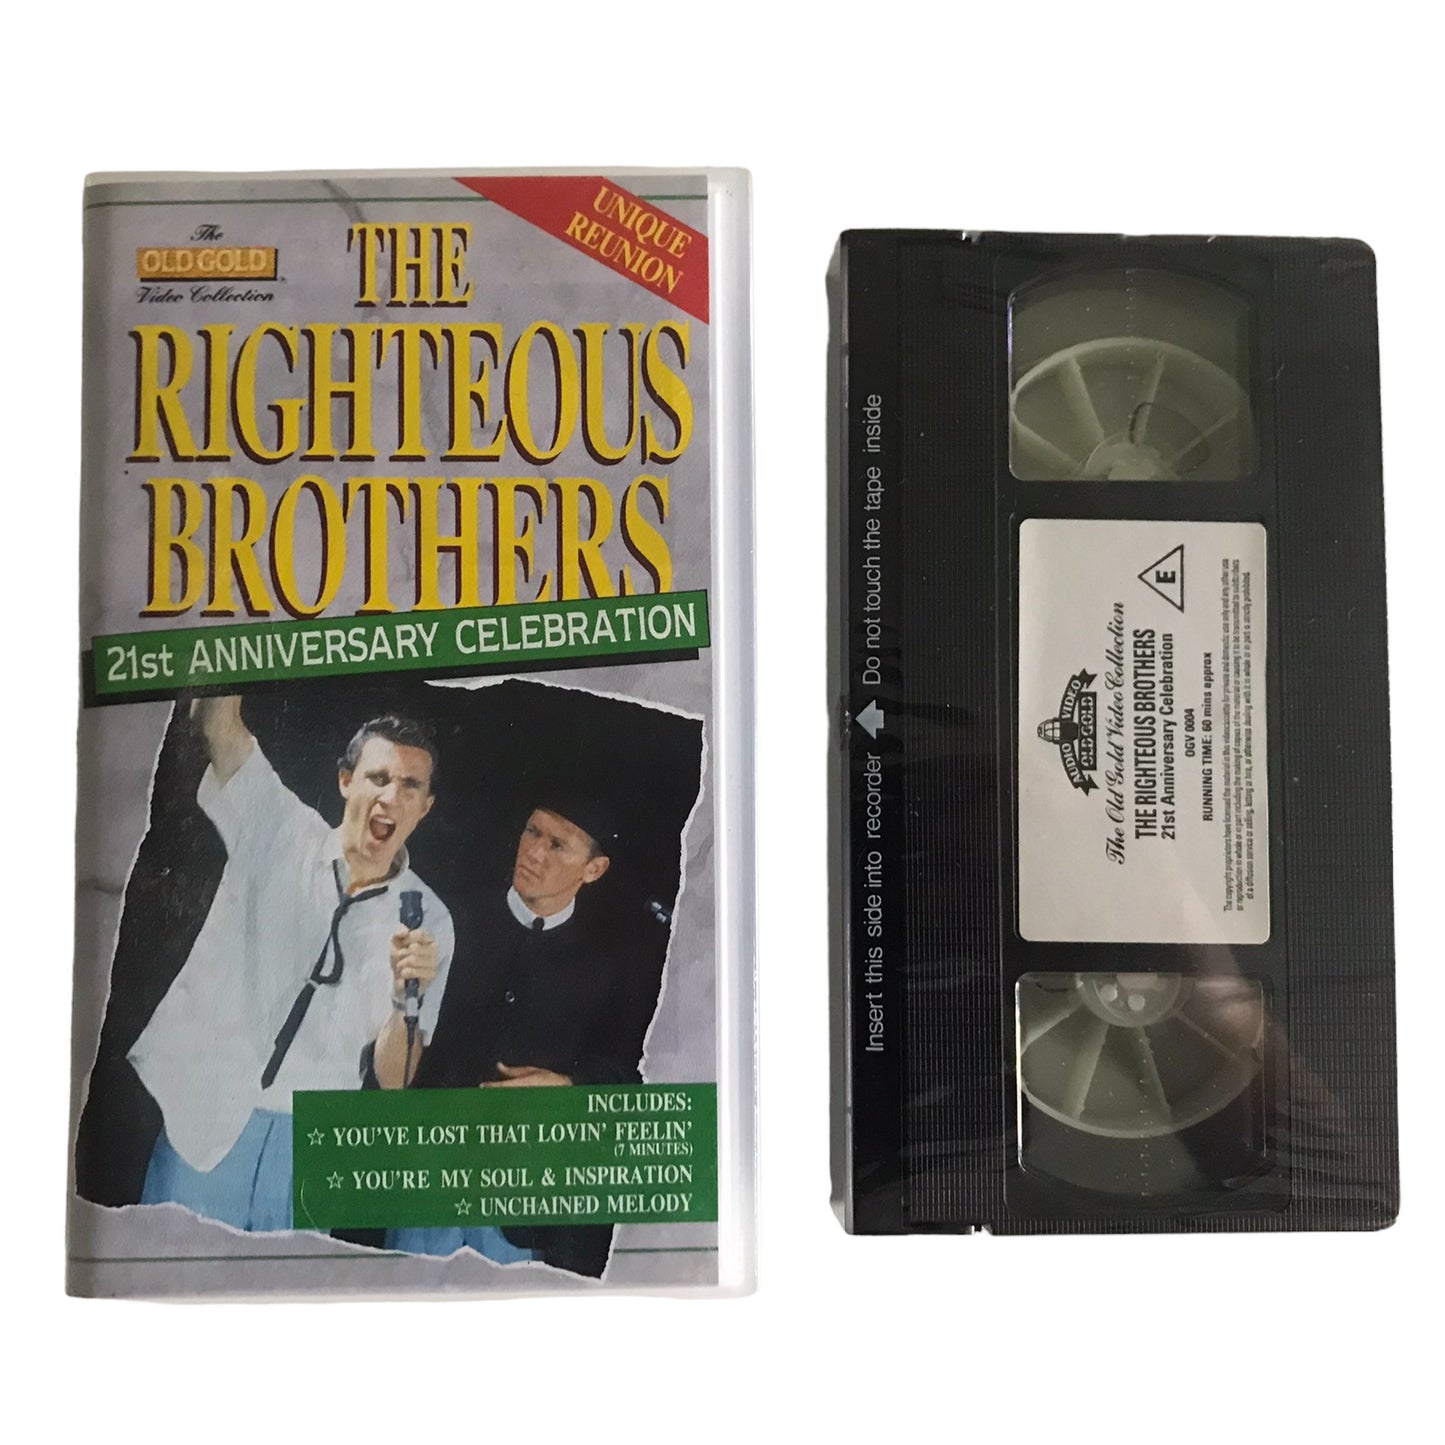 The Righteous Brothers - 21st Anniversary Celebration - The Old Gold Video - Music - Pal - VHS-